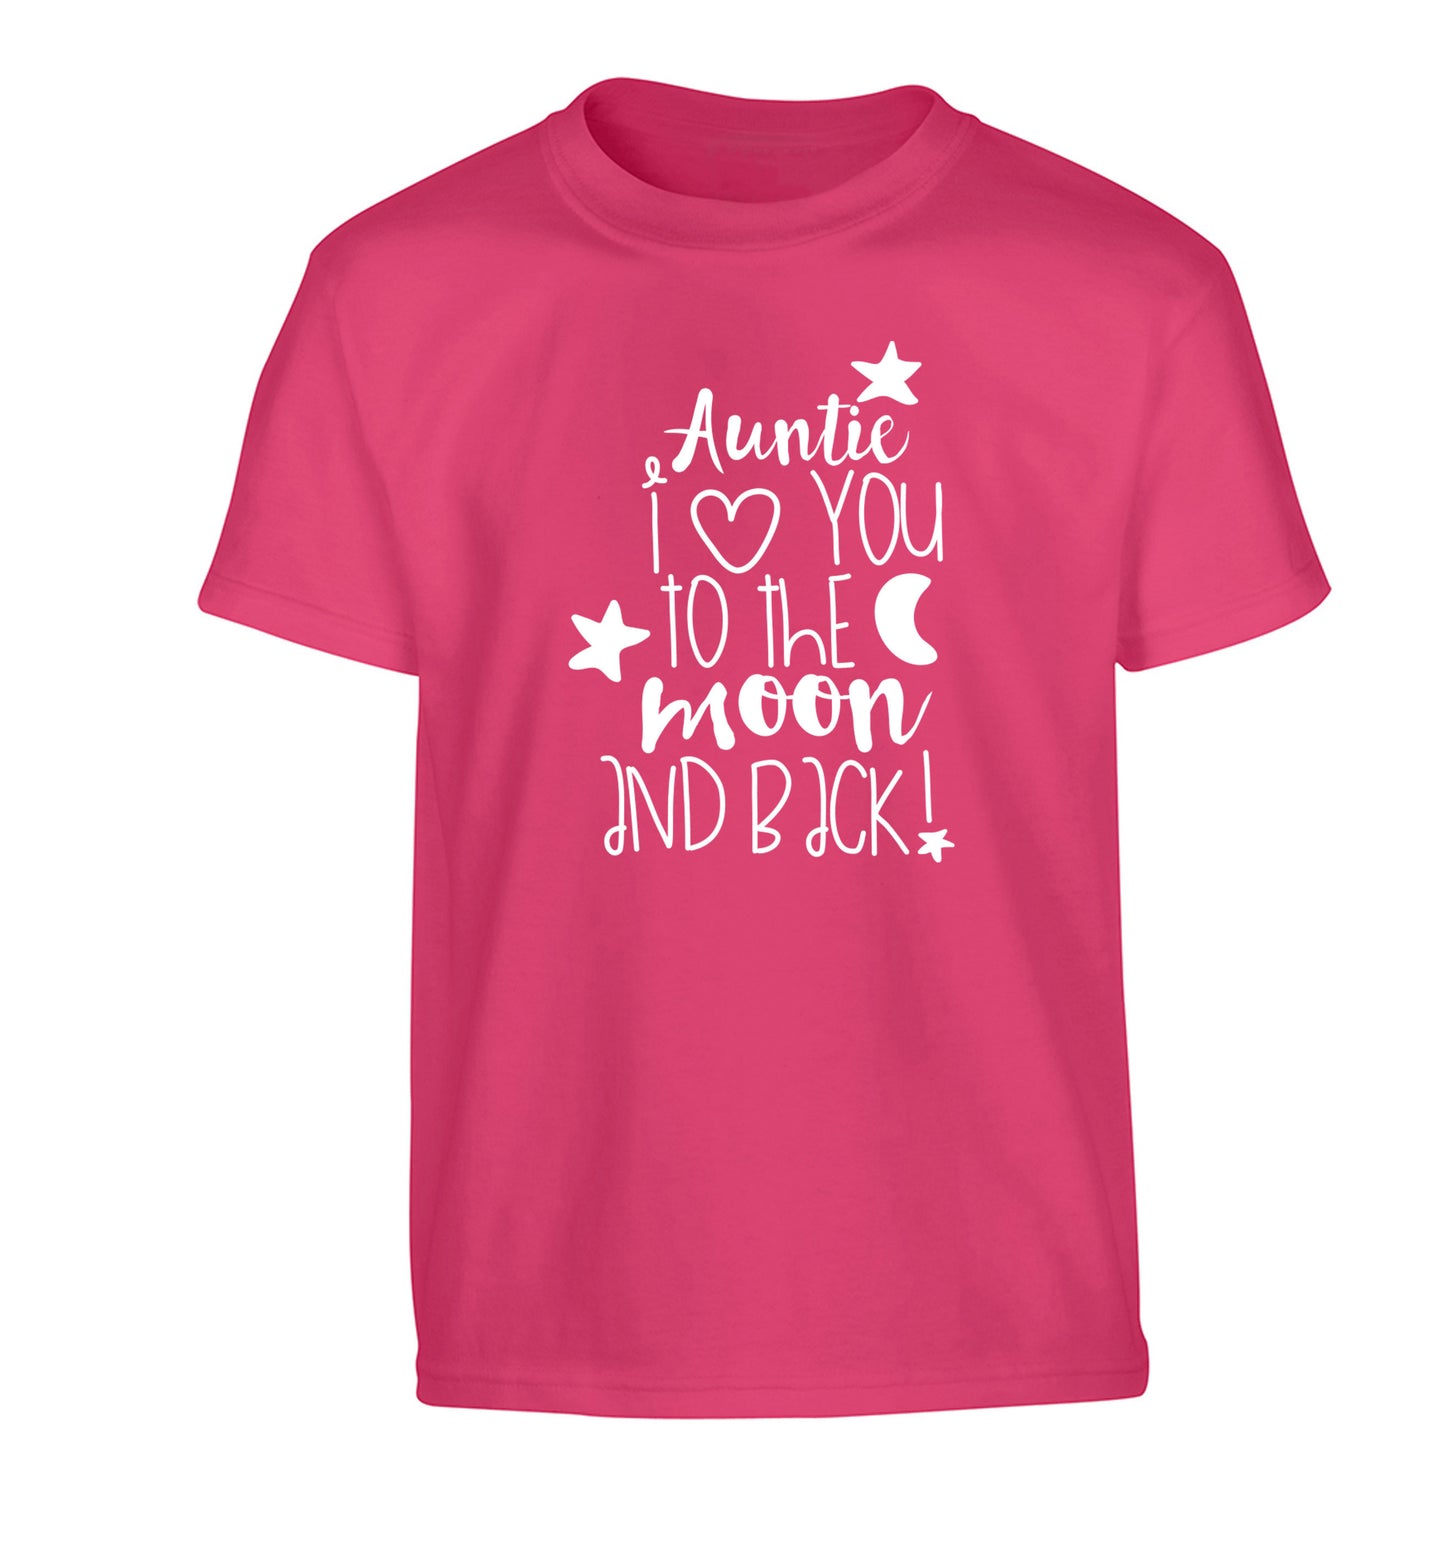 Auntie I love you to the moon and back Children's pink Tshirt 12-14 Years